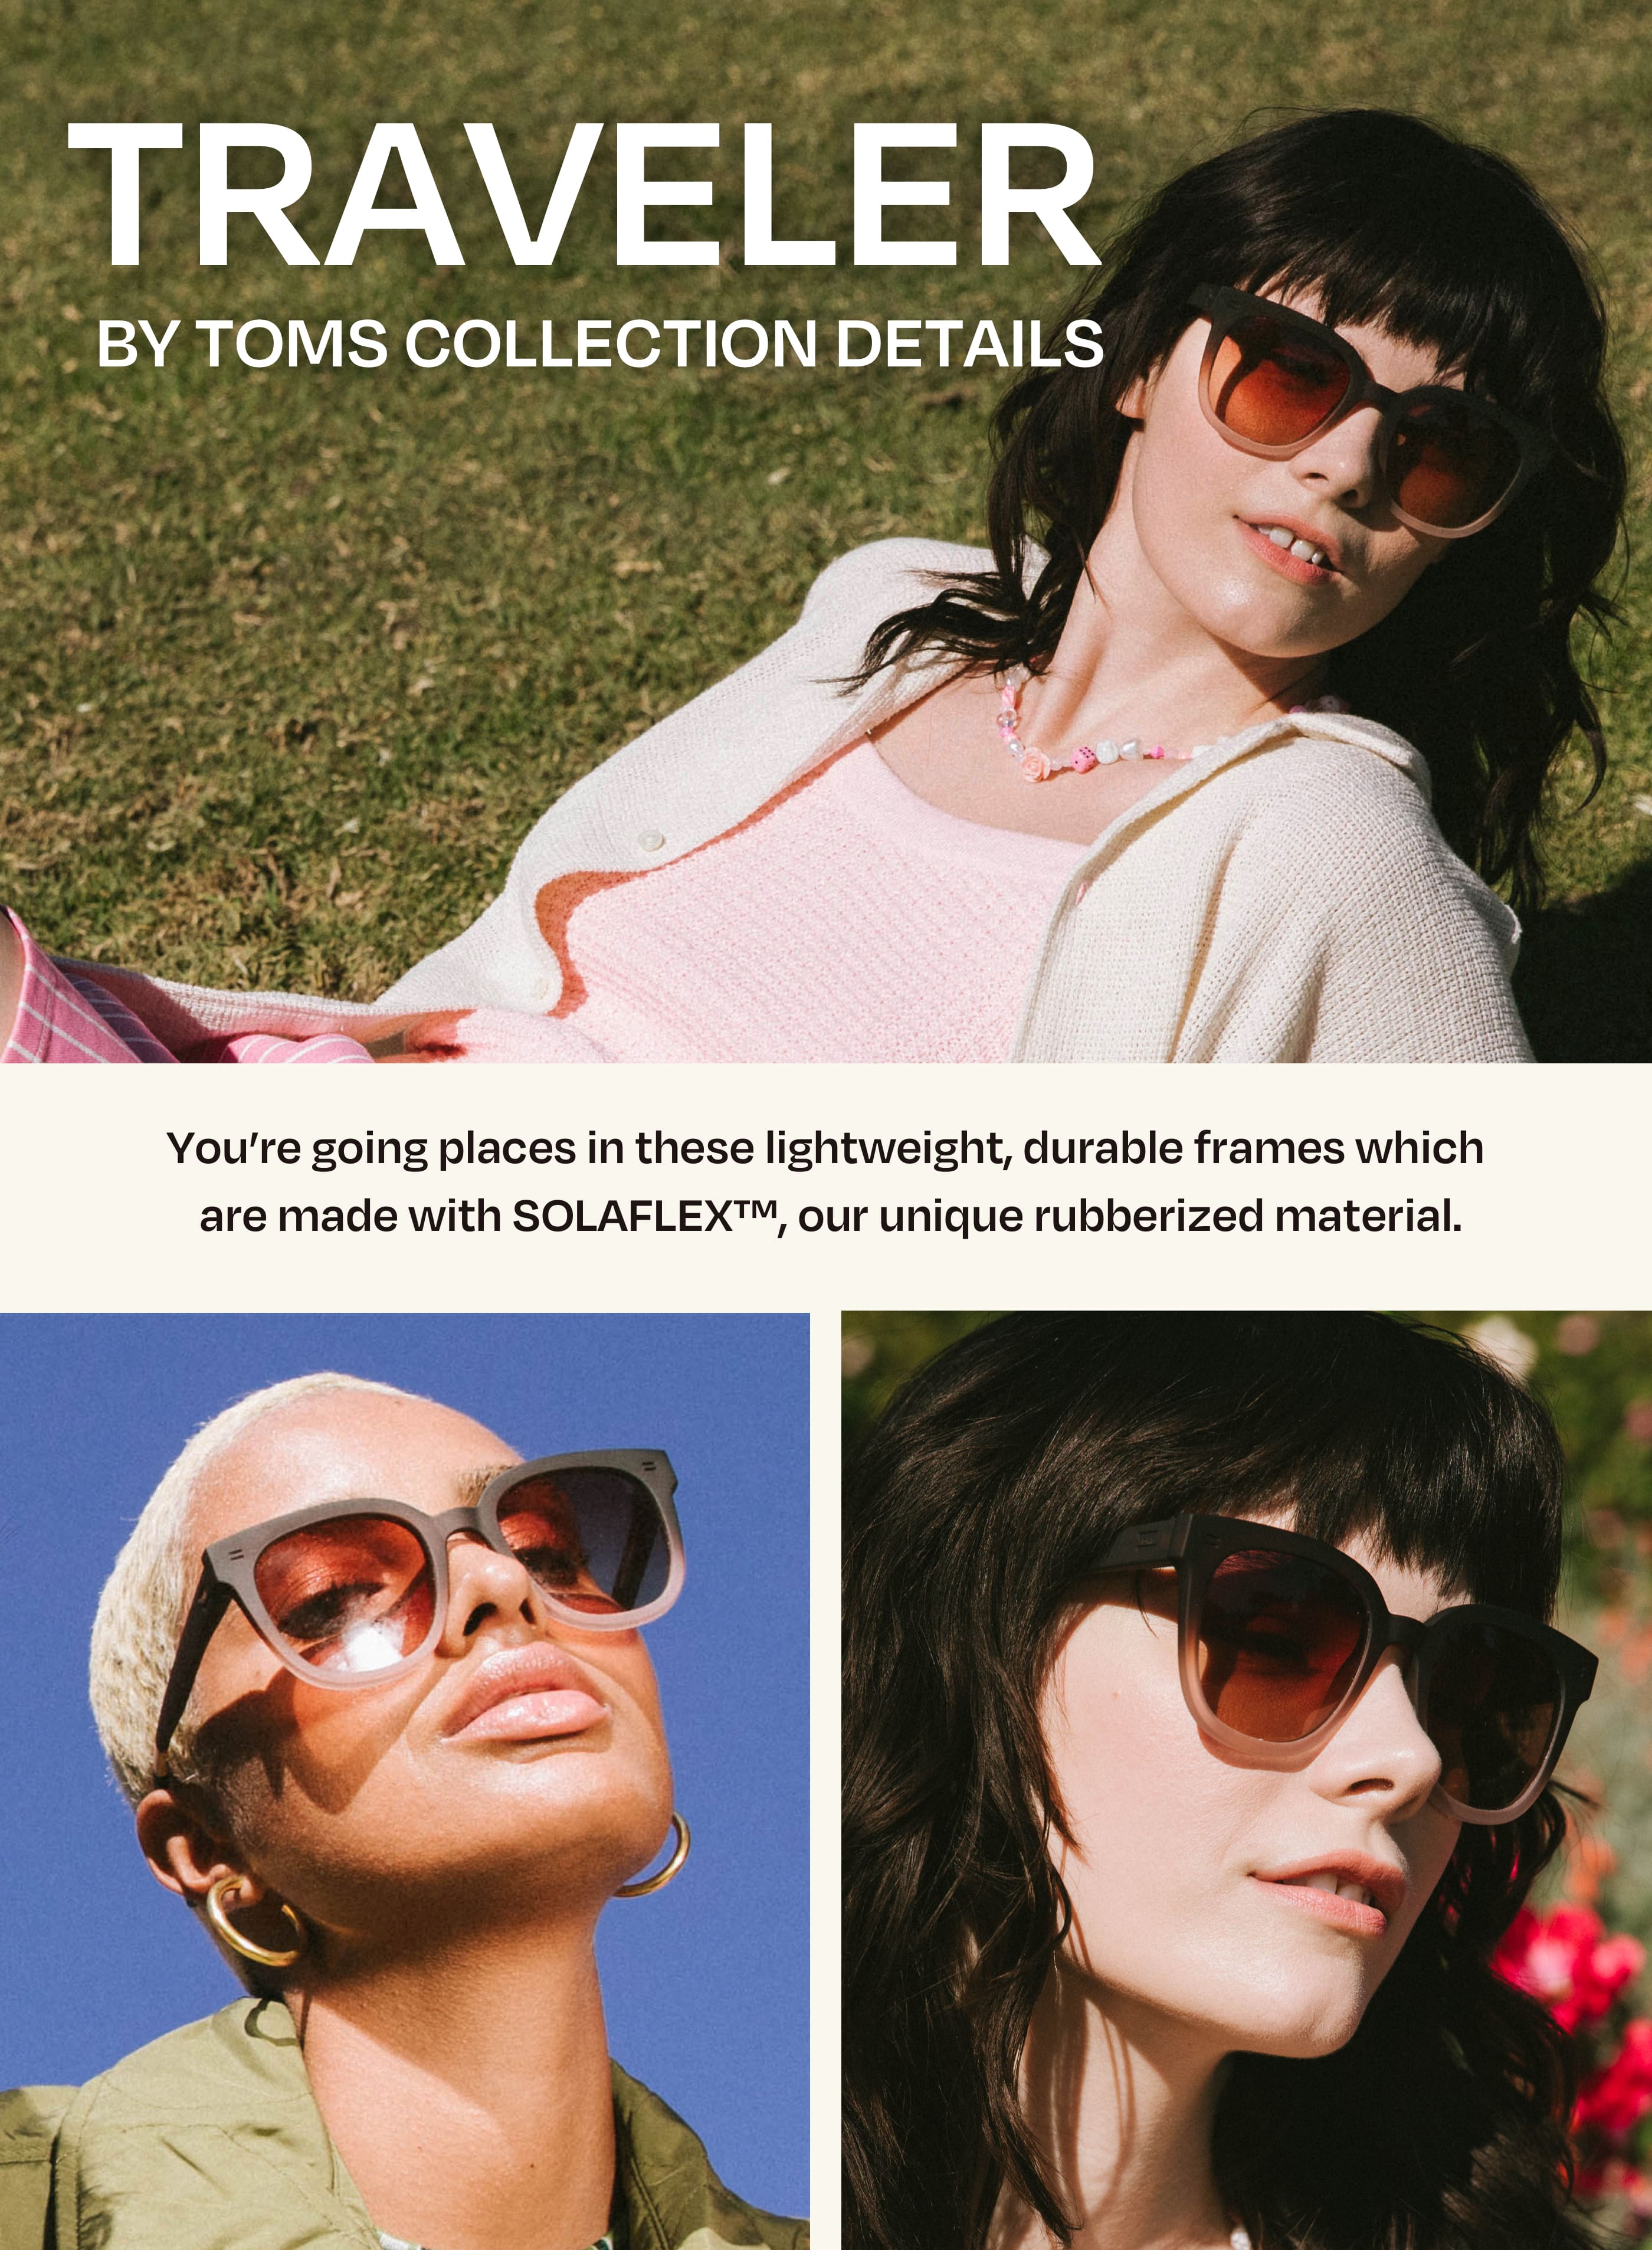 Traveler by TOMS Collection details.